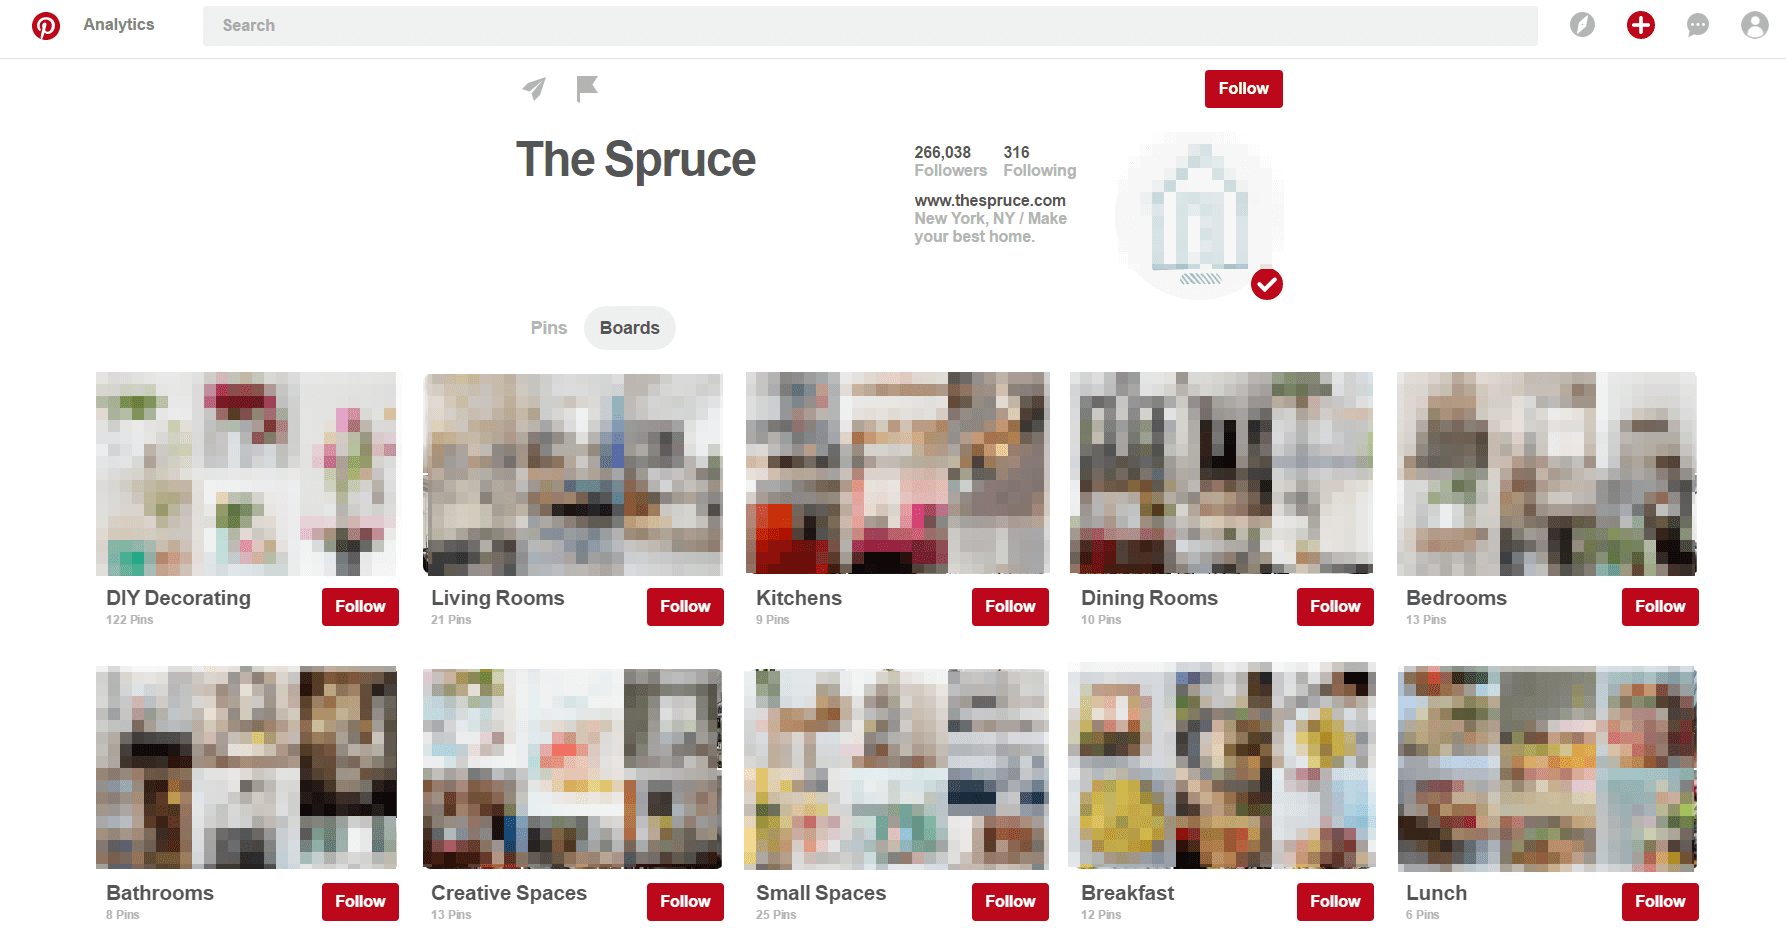 Example of a Pinterest business account: The Spruce